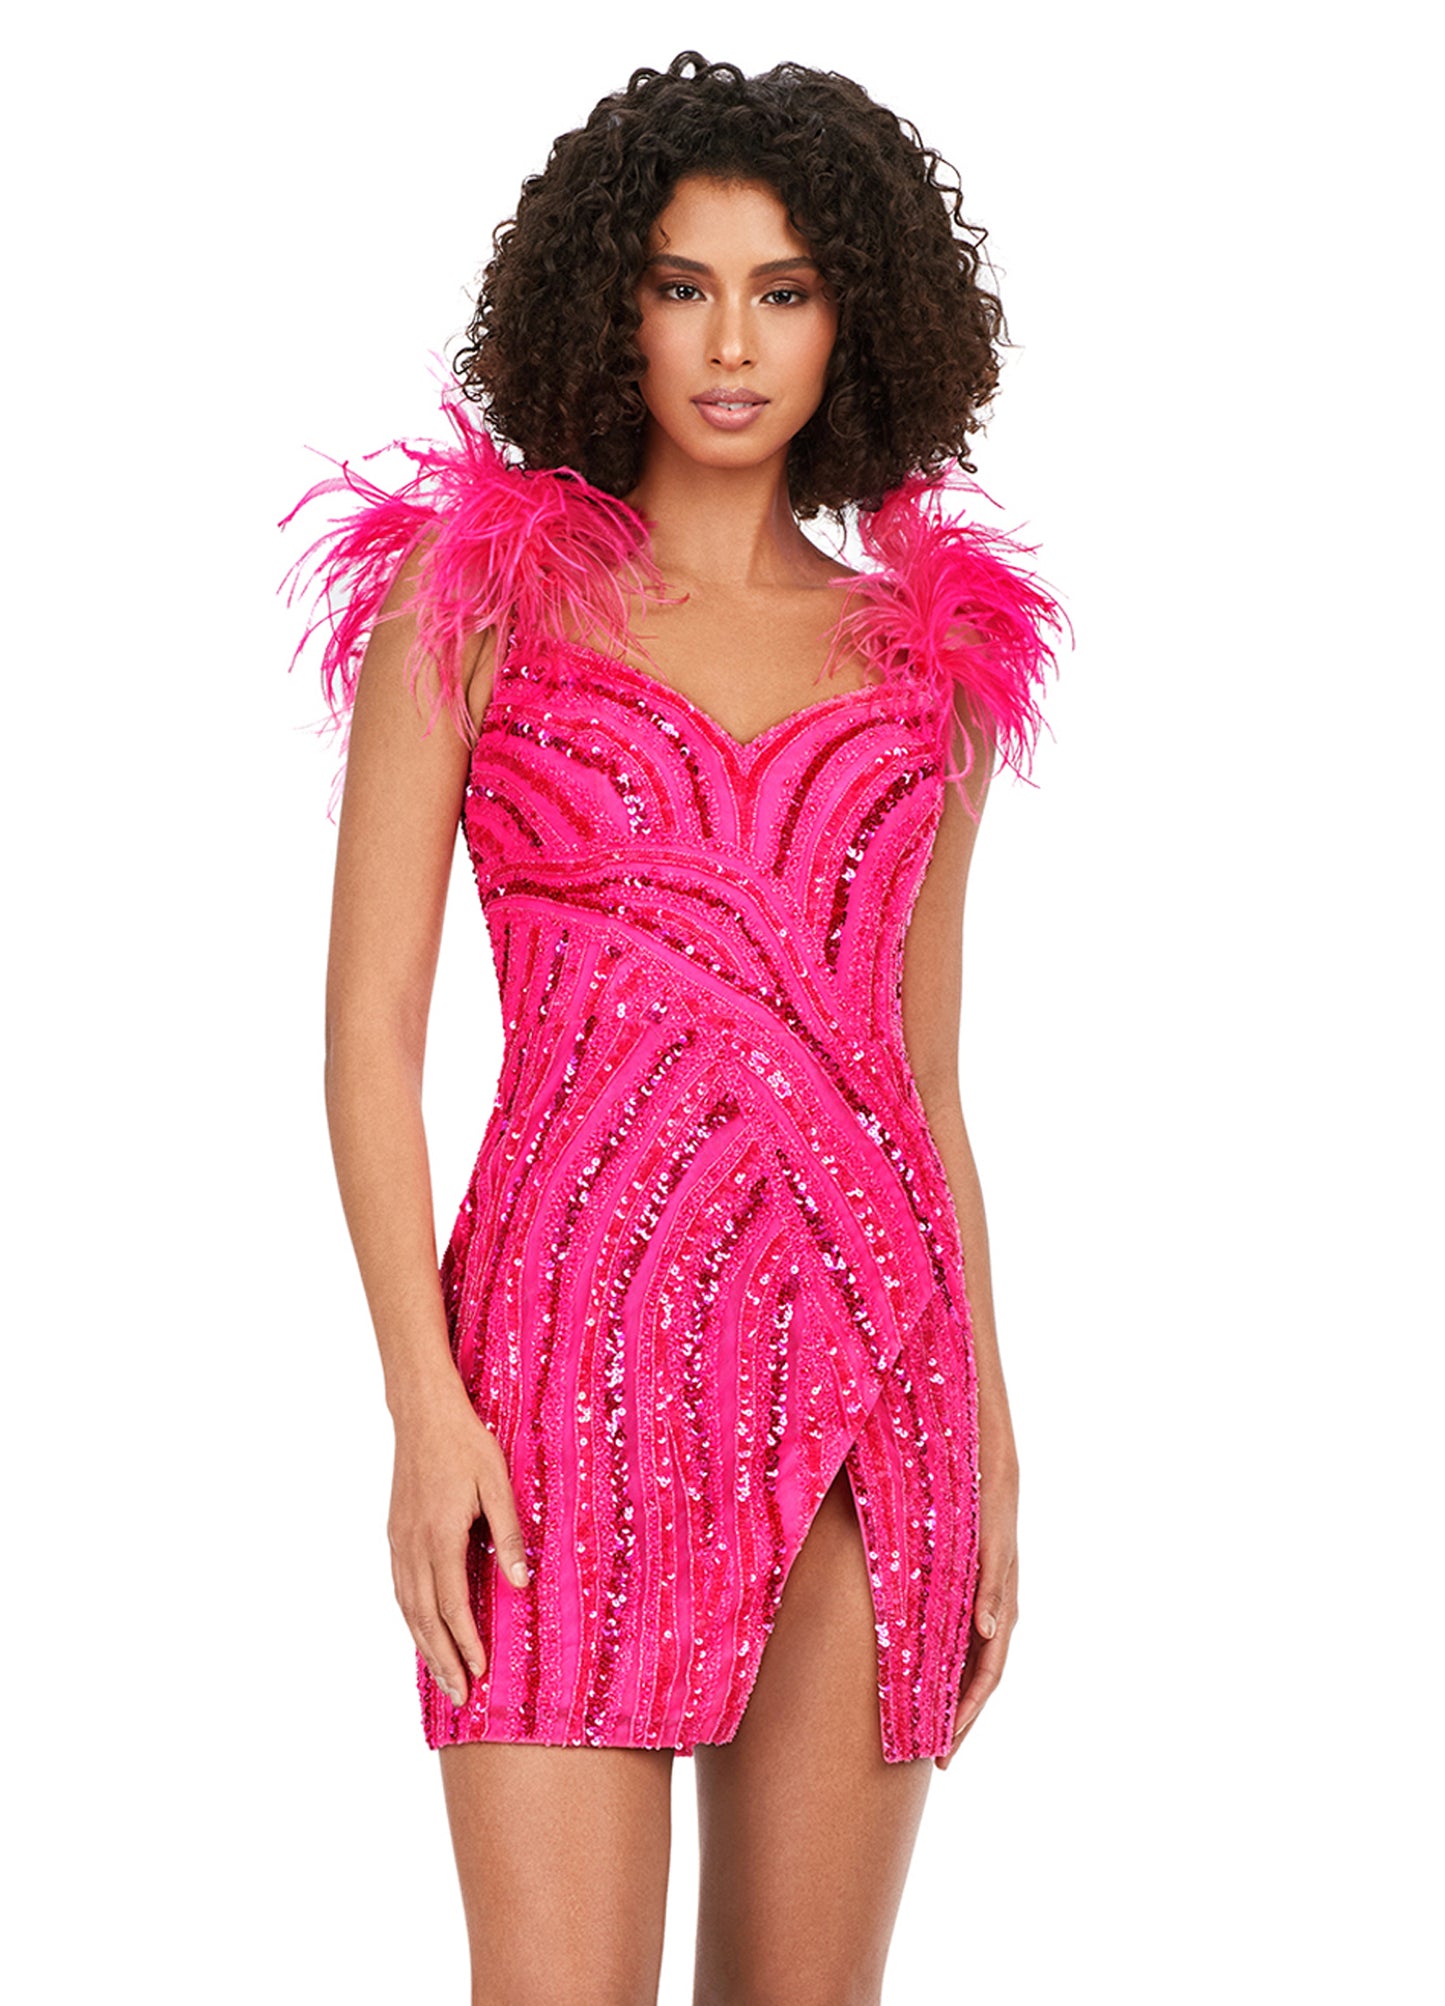 Ashley Lauren 4626 Beaded Spaghetti Strap With Feather Design Fitted Cocktail Homecoming Dress. Look amazing in the Ashley Lauren 4626 dress. This fitted cocktail homecoming dress features beautiful beaded details, spaghetti straps, and a unique feather design for an unforgettable look. Wear it and be the envy of the party.